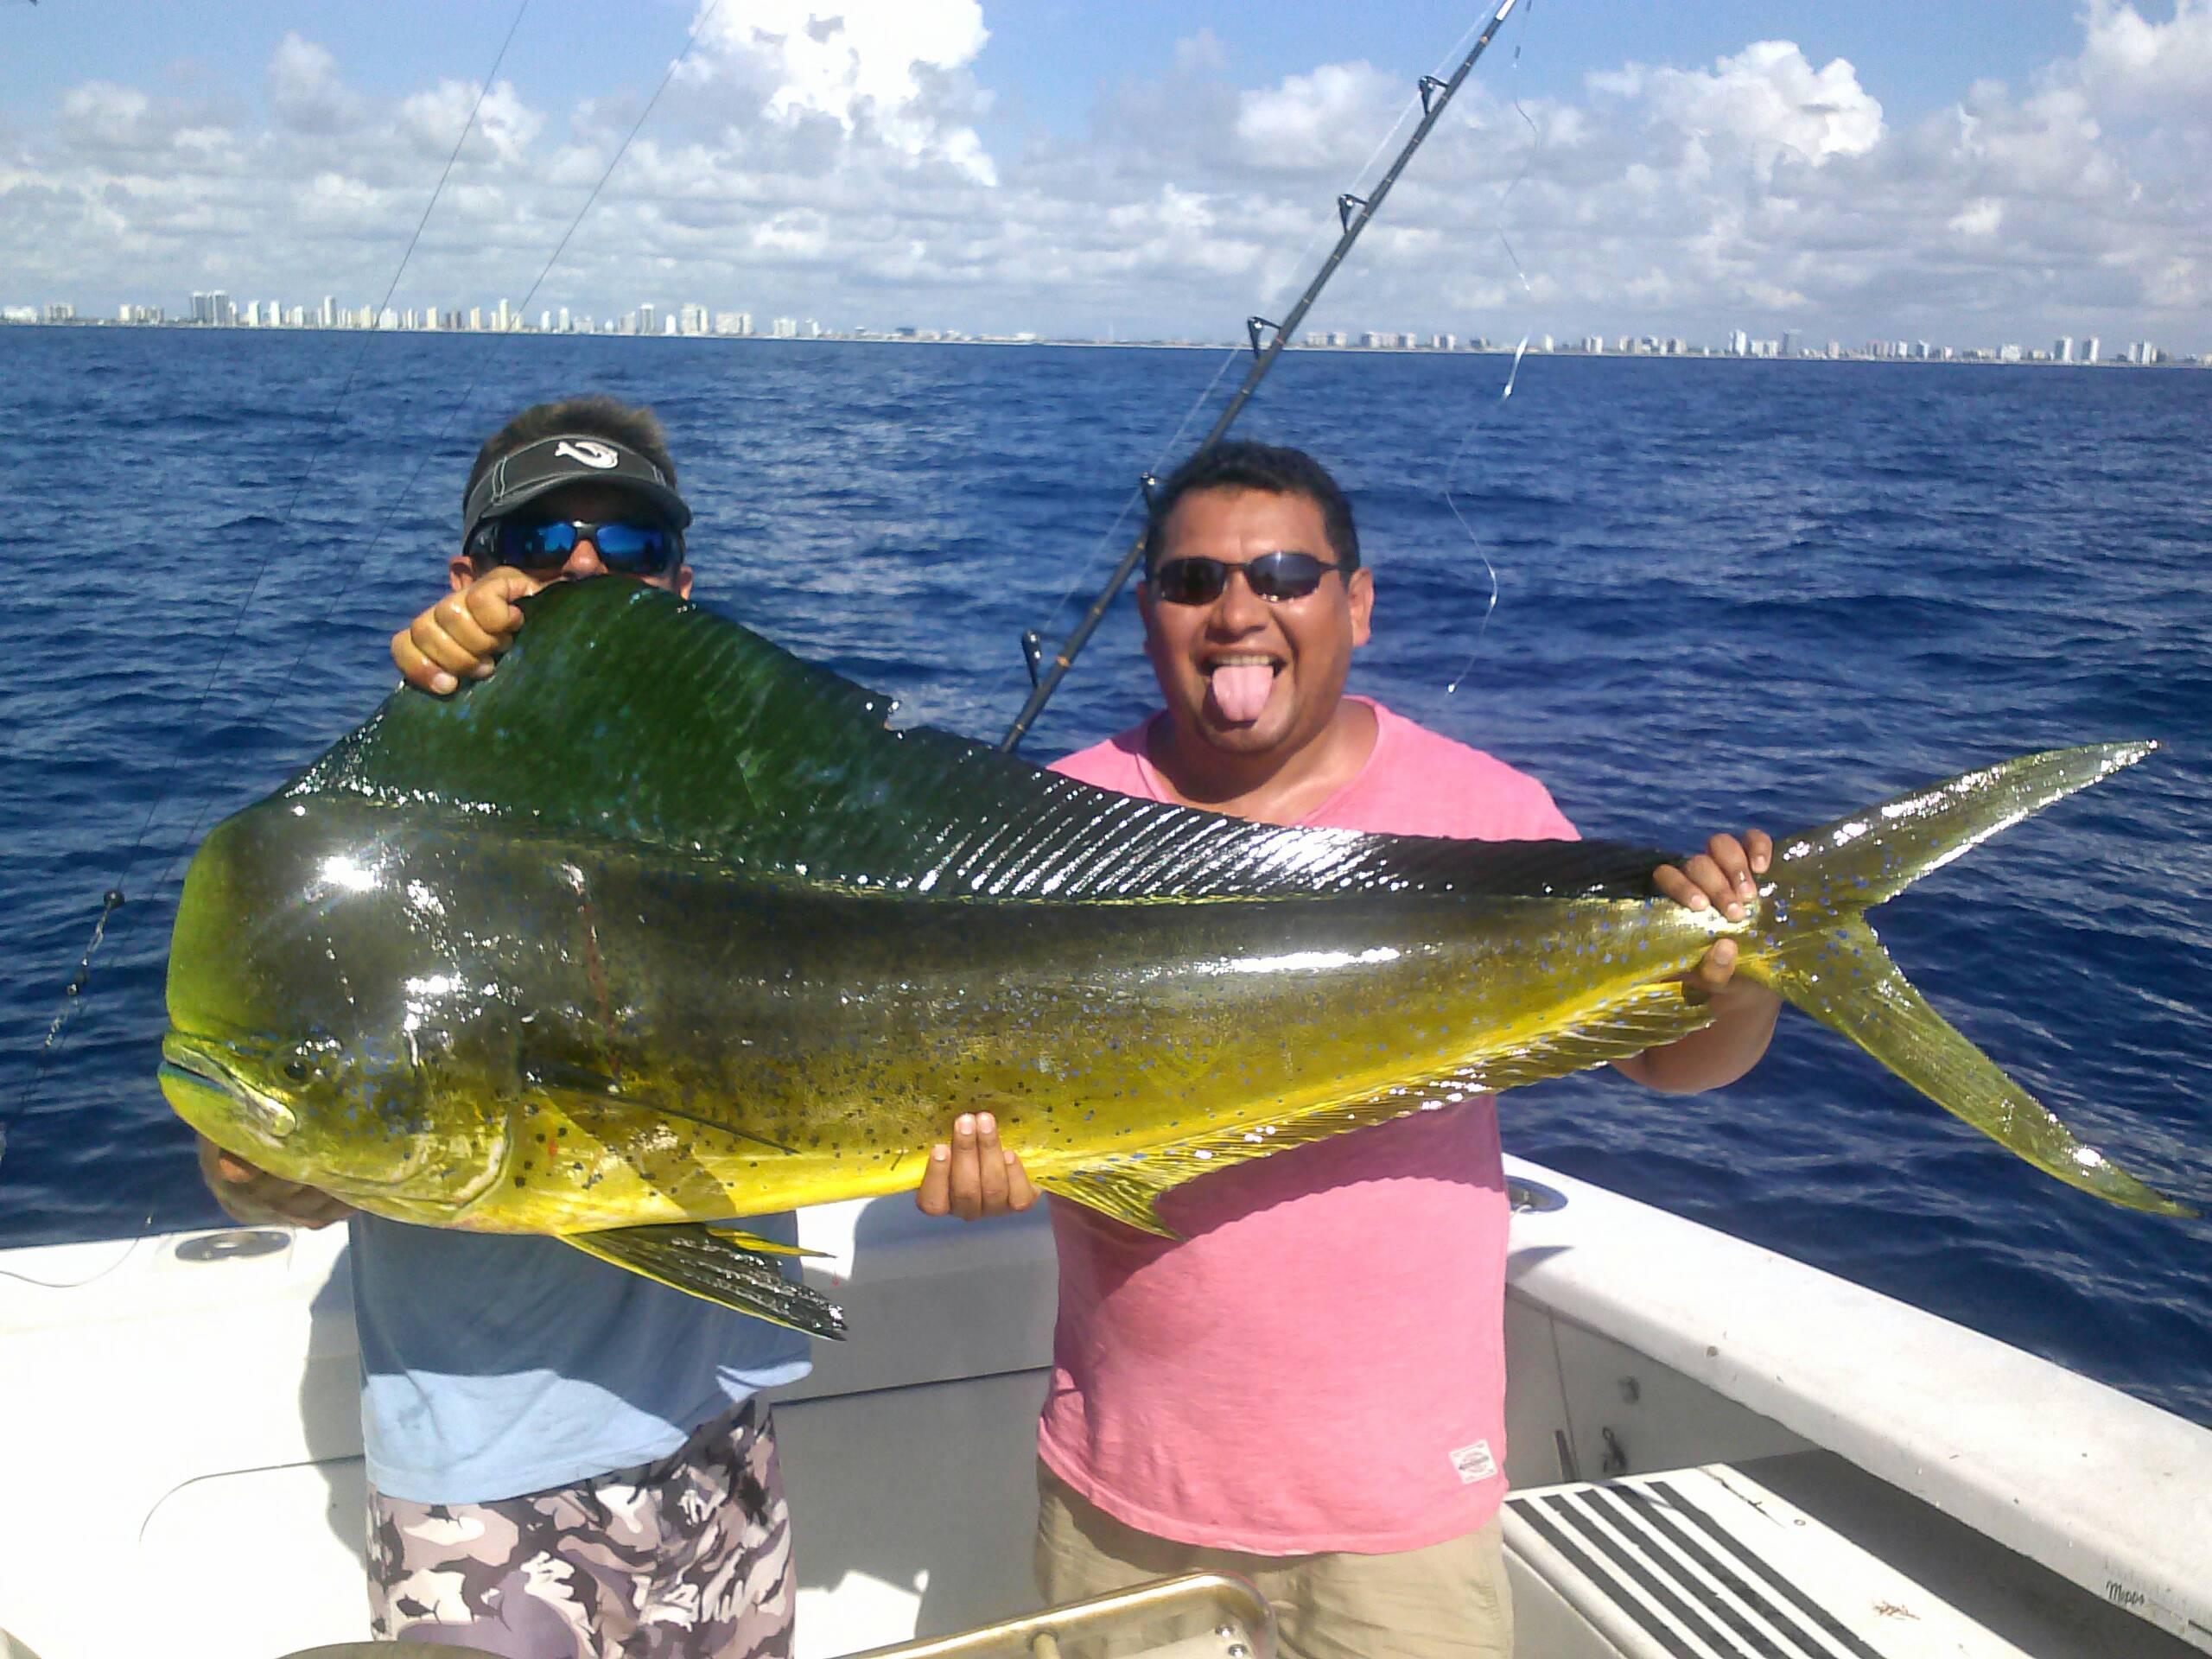 Great Action on our Fort Lauderdale Fishing Trips